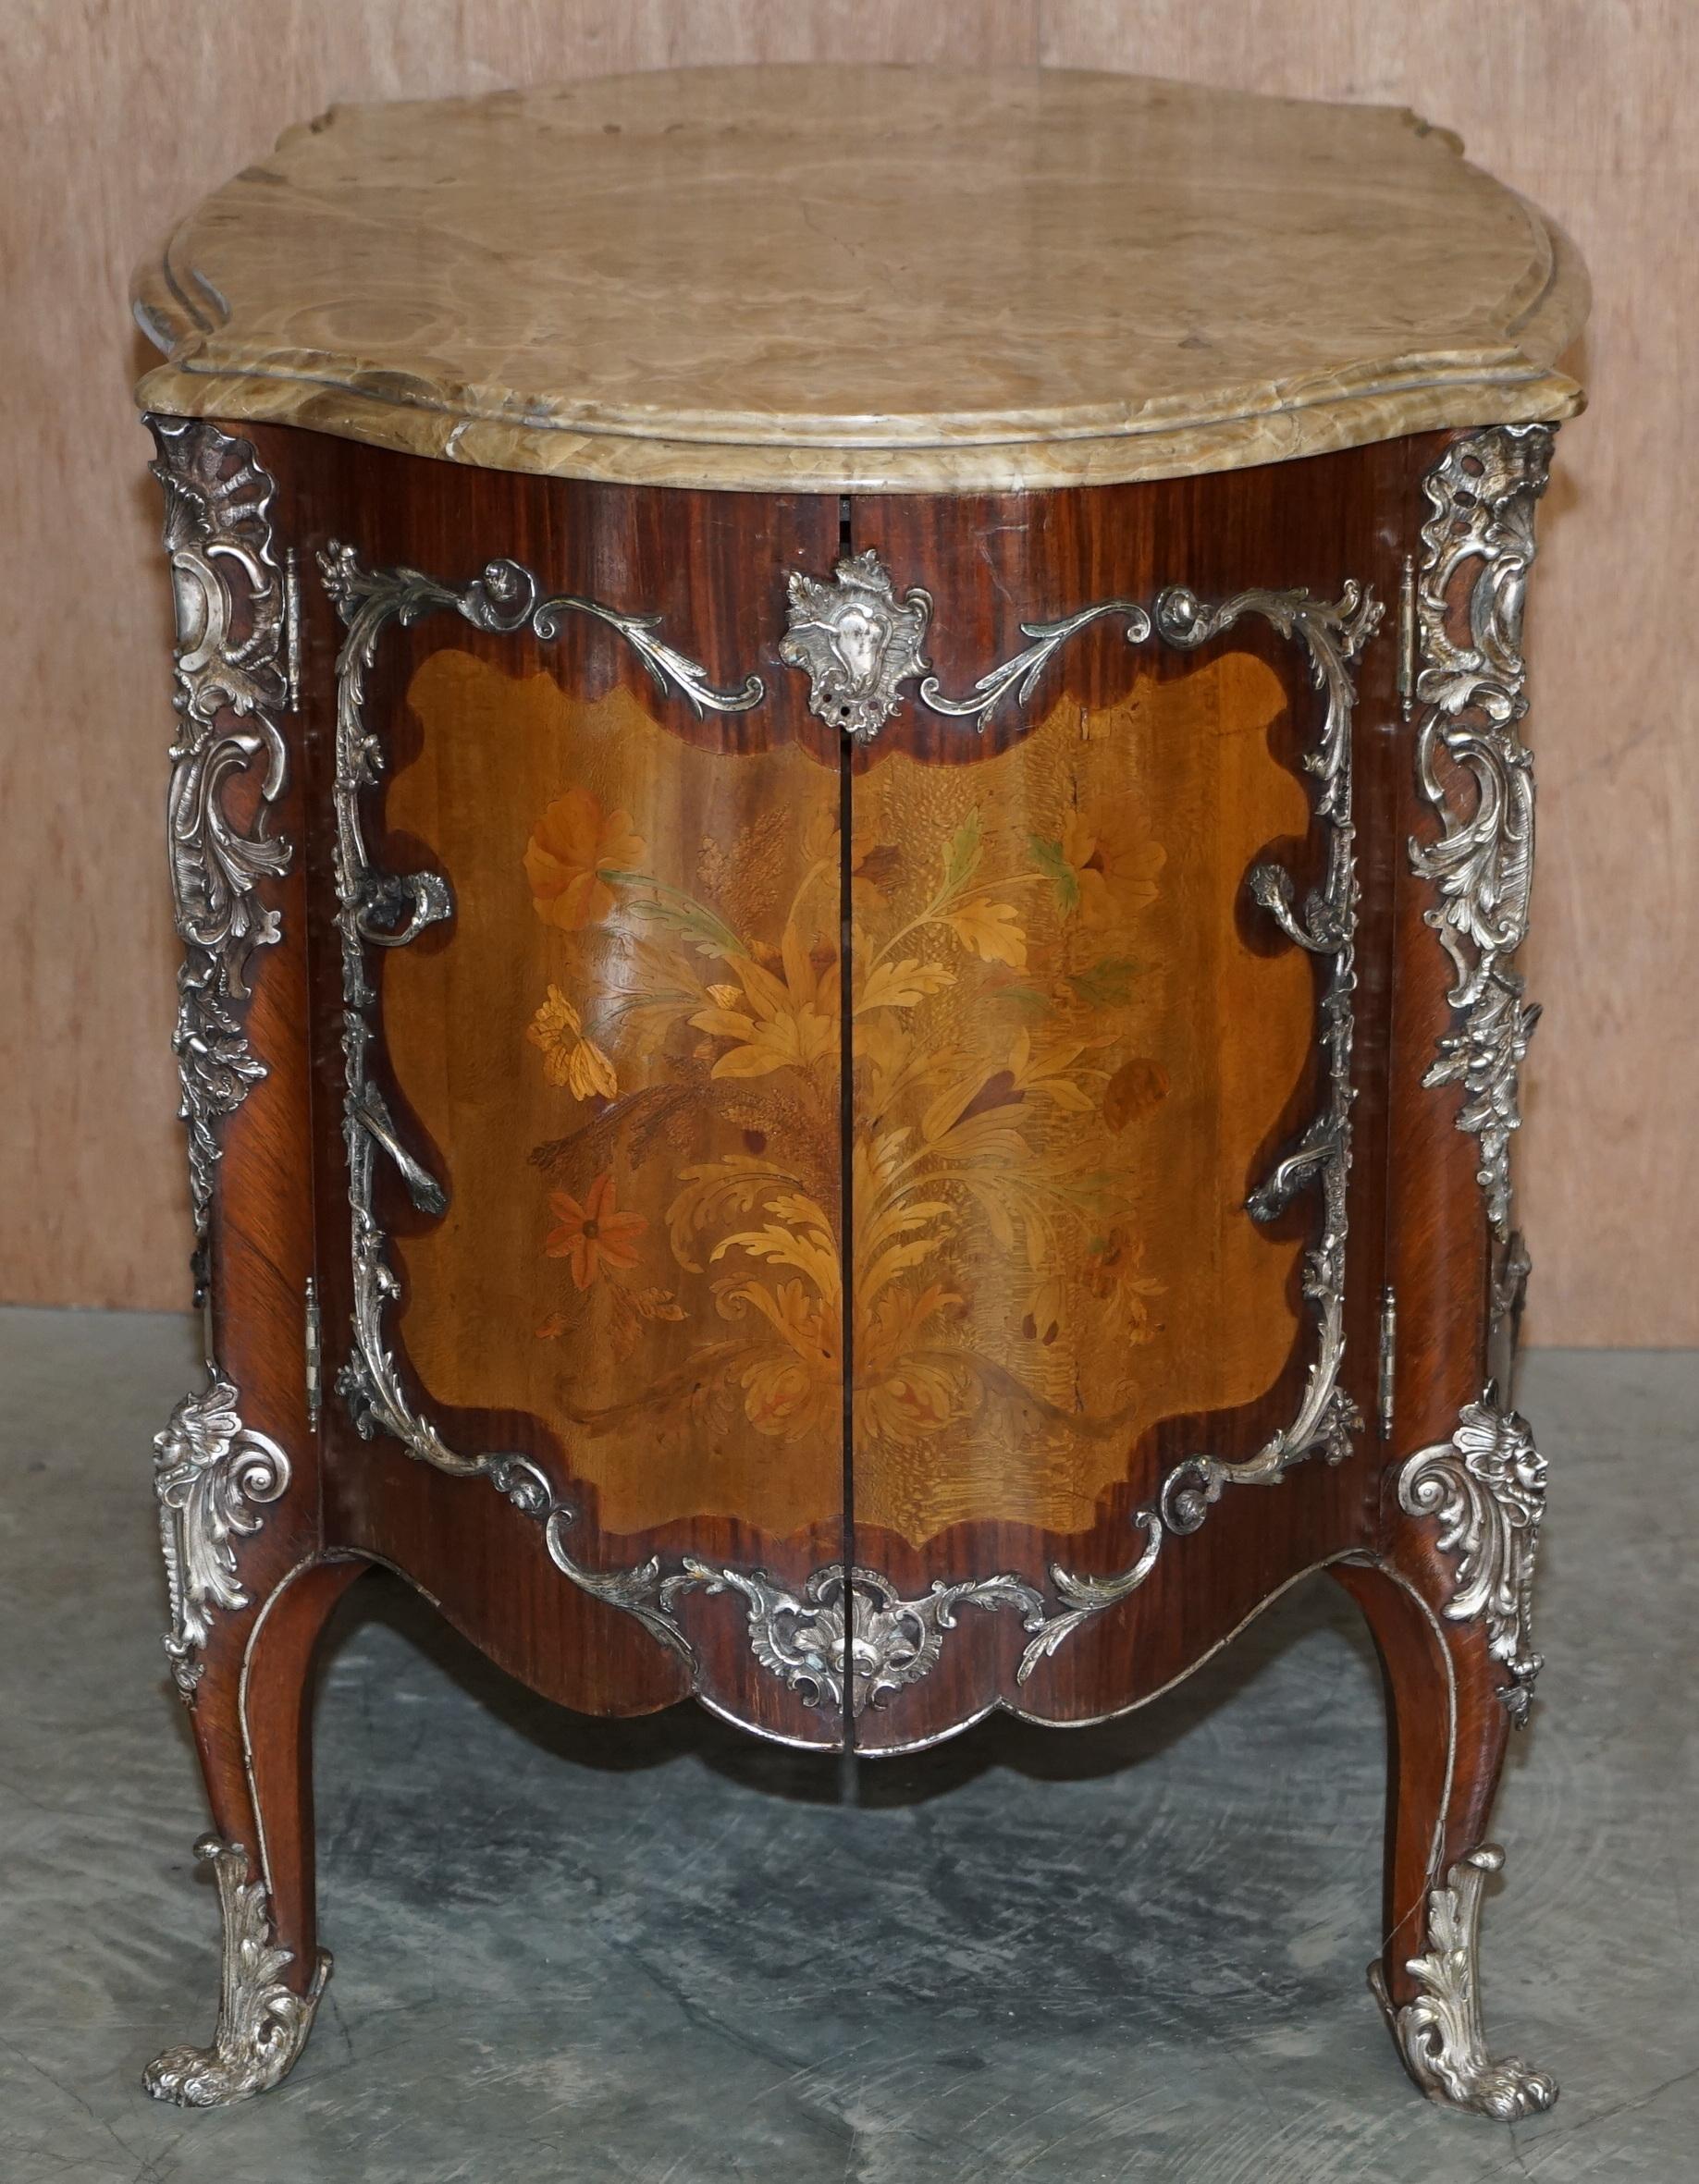 Rare & Collectable Germain Landrin circa 1750 French Marble Kingwood Sideboard For Sale 8